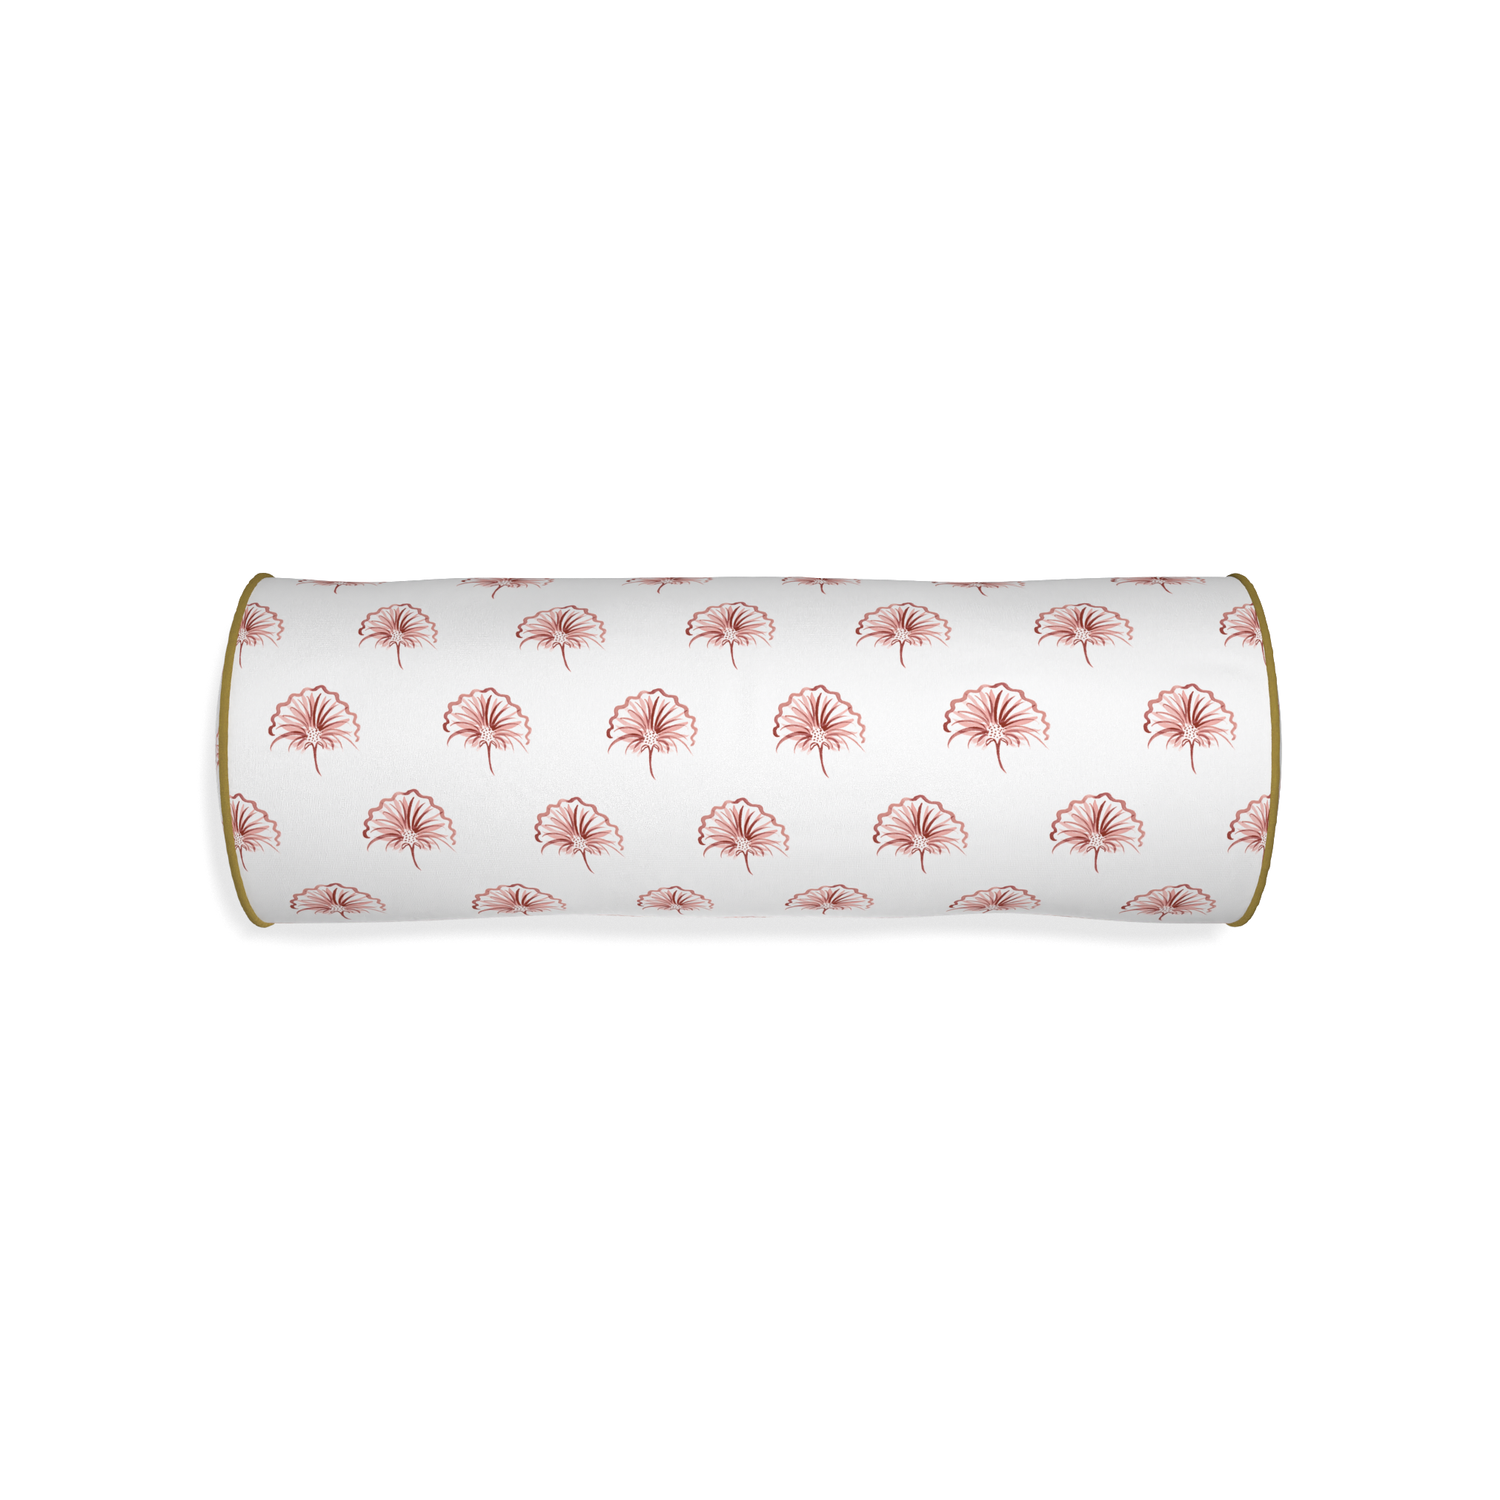 Bolster penelope rose custom floral pinkpillow with c piping on white background